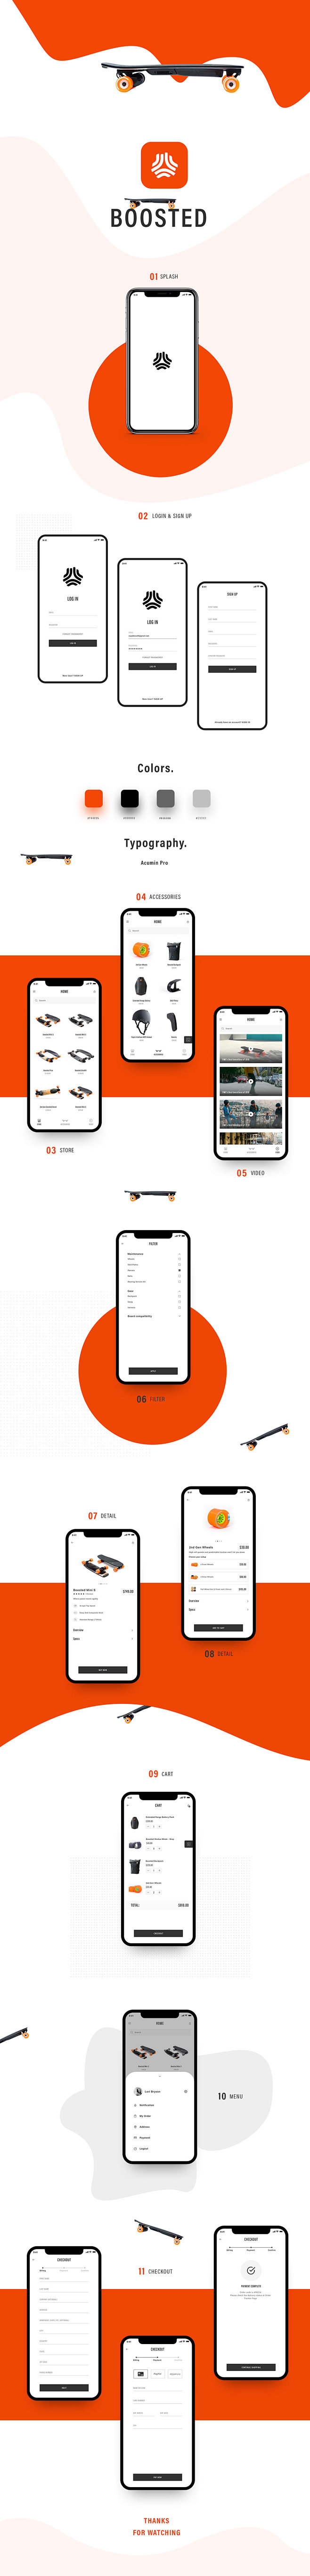 Boosted App Redesign...